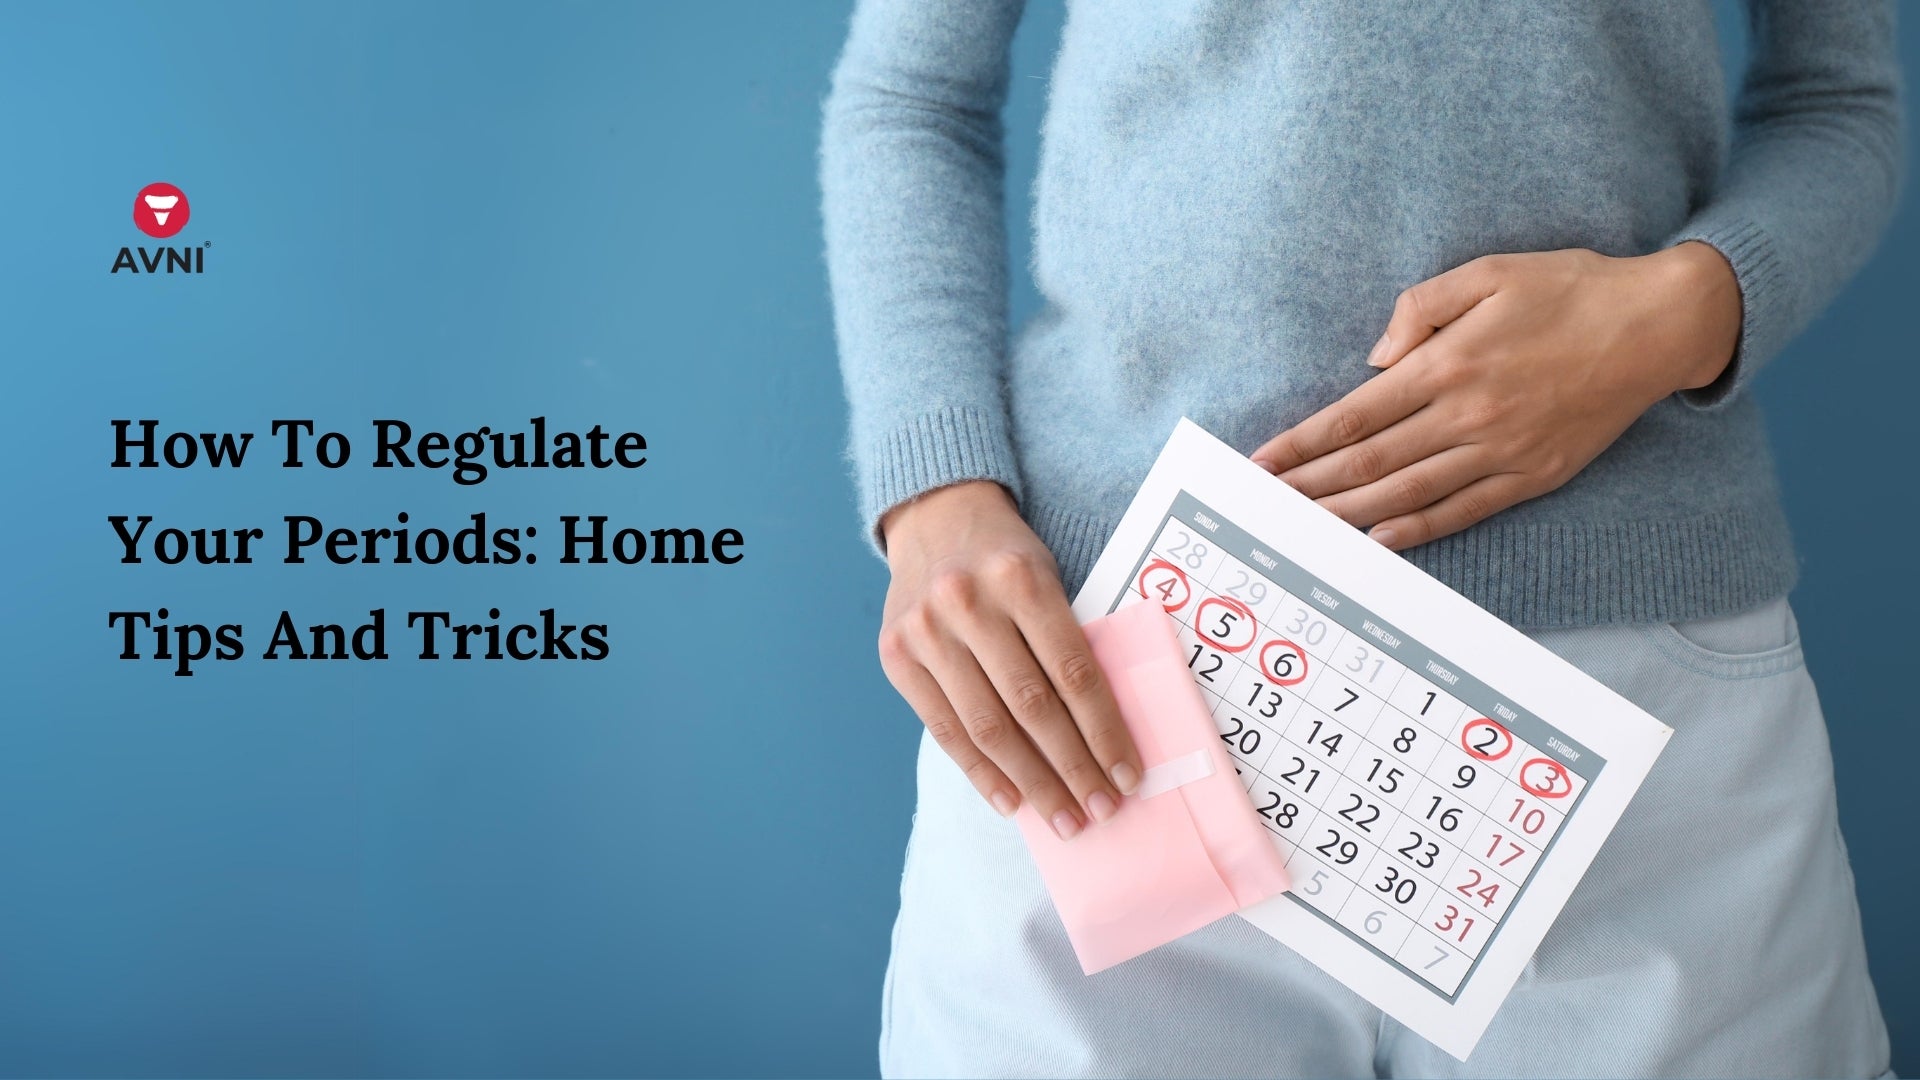 How To Regulate Your Periods: Home Tips And Tricks